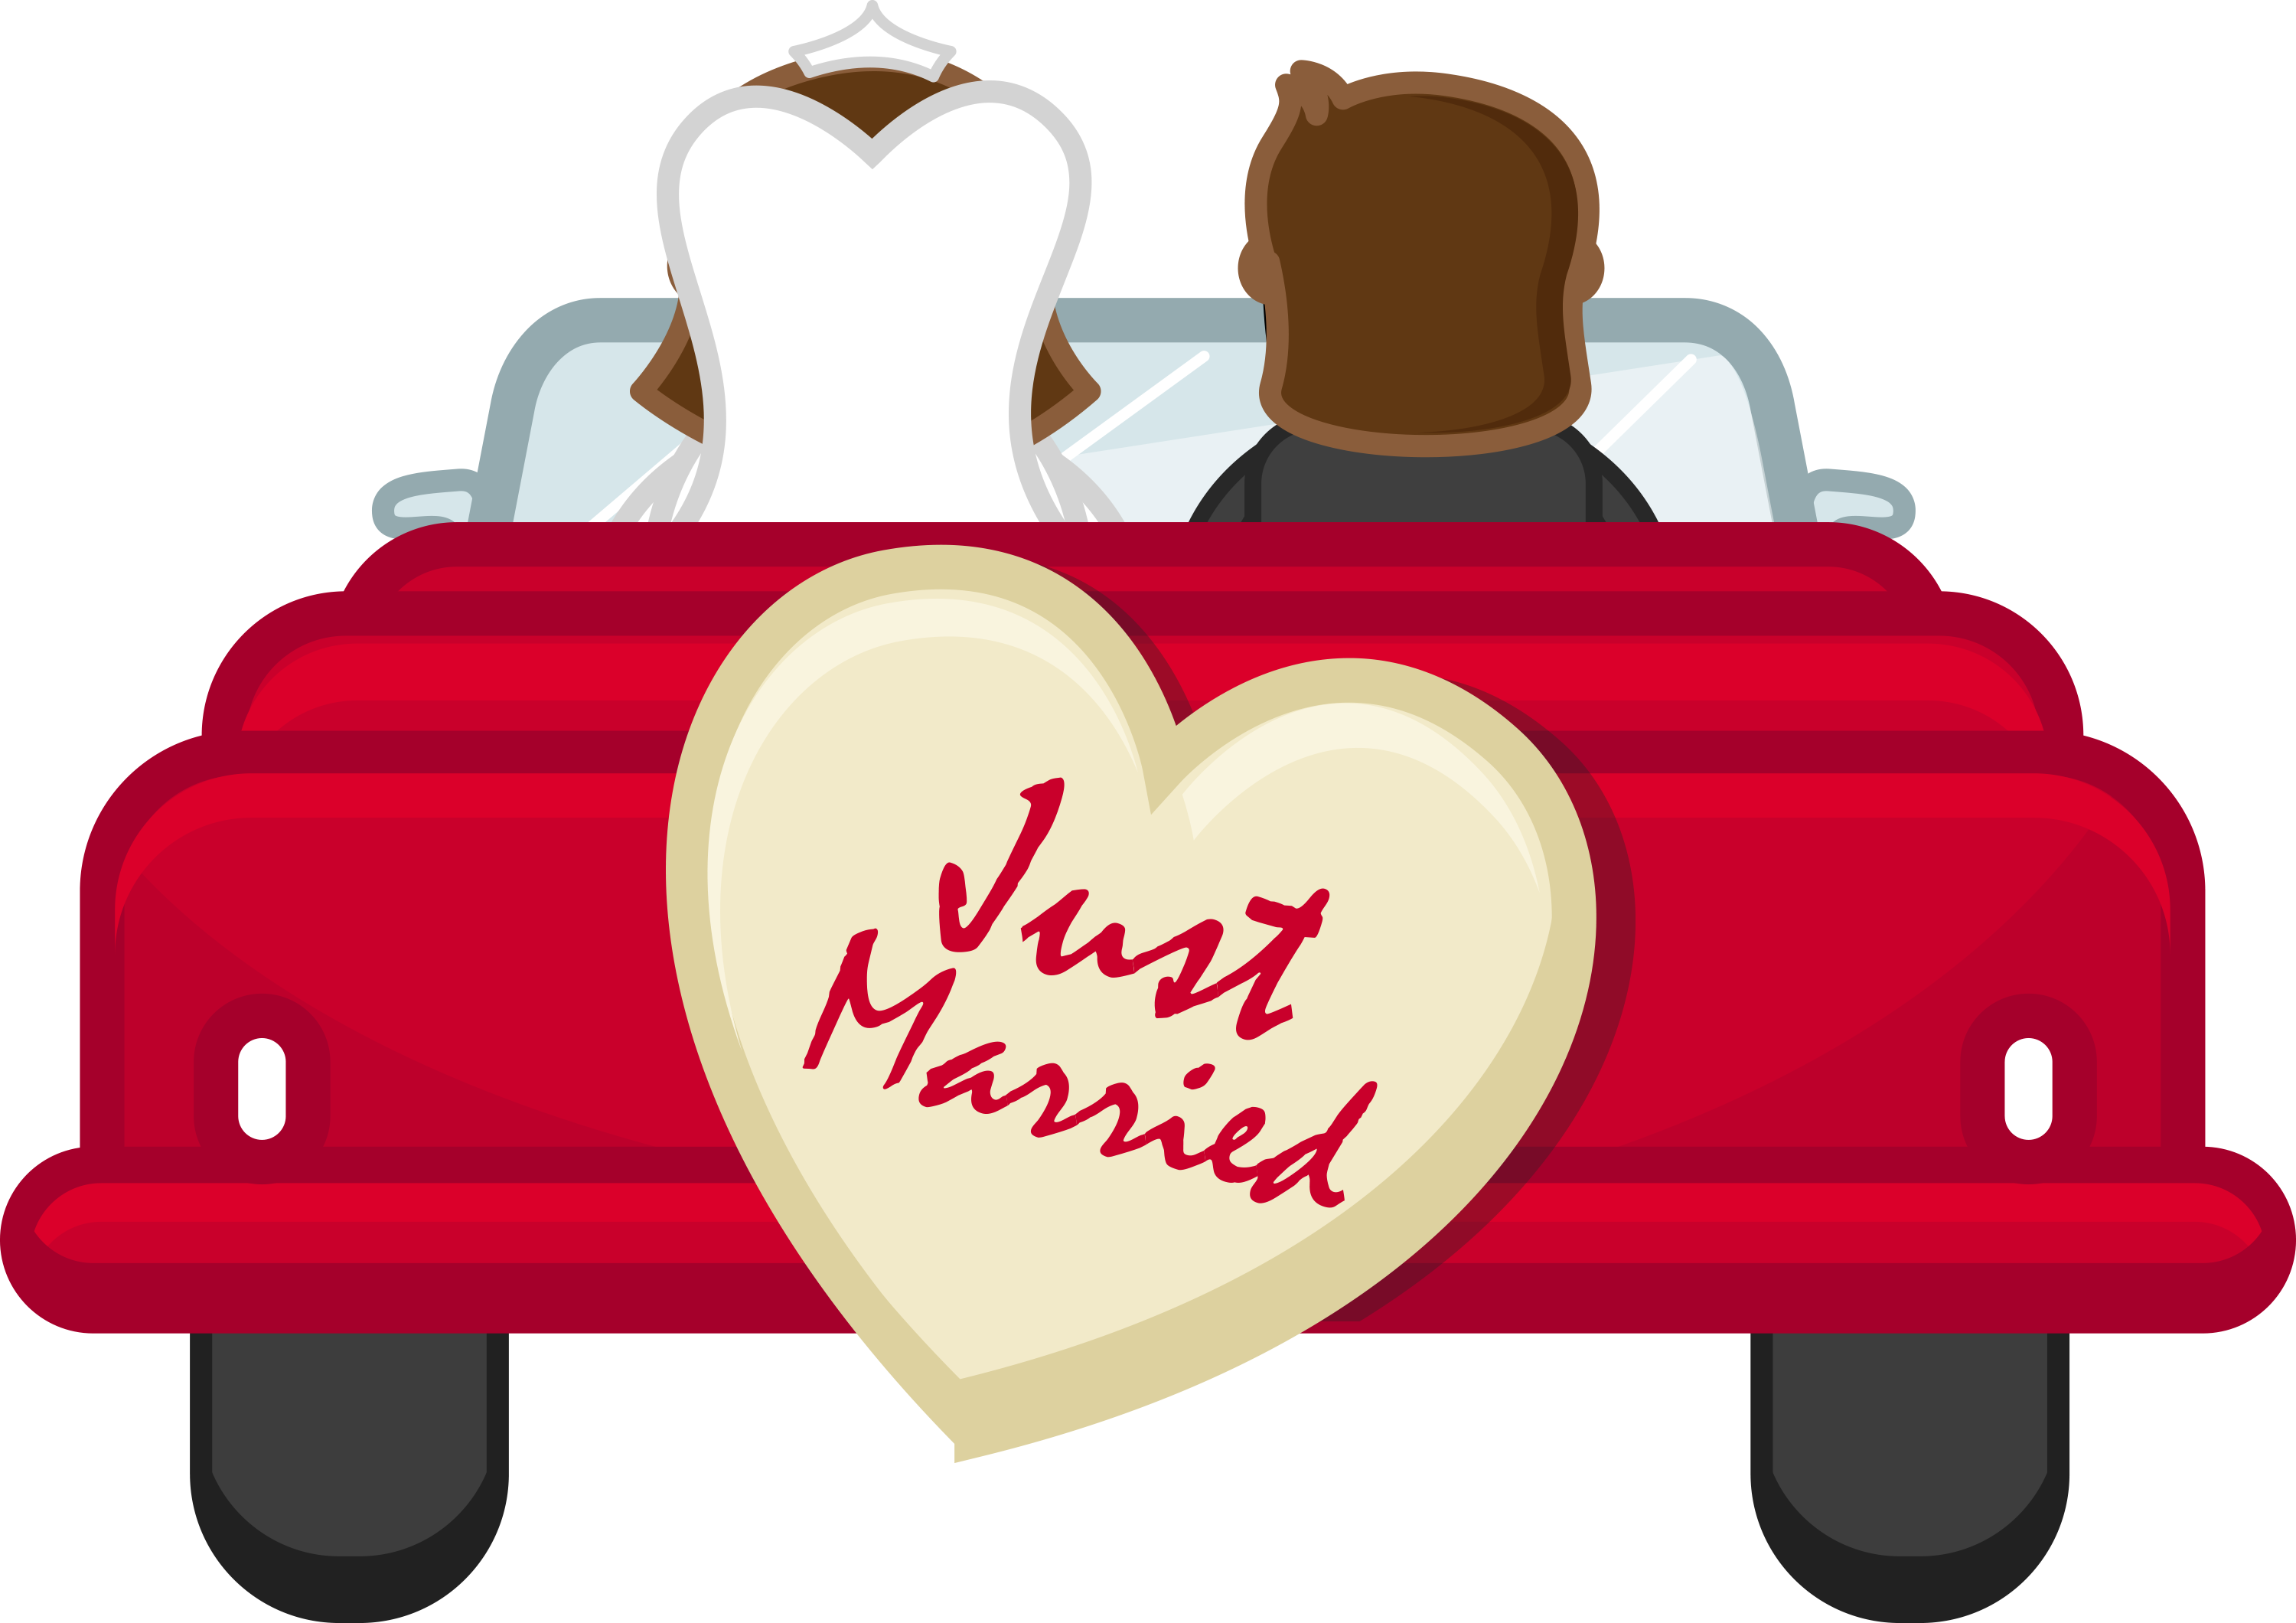 Just Married Png Clipart - Just Married, Transparent background PNG HD thumbnail